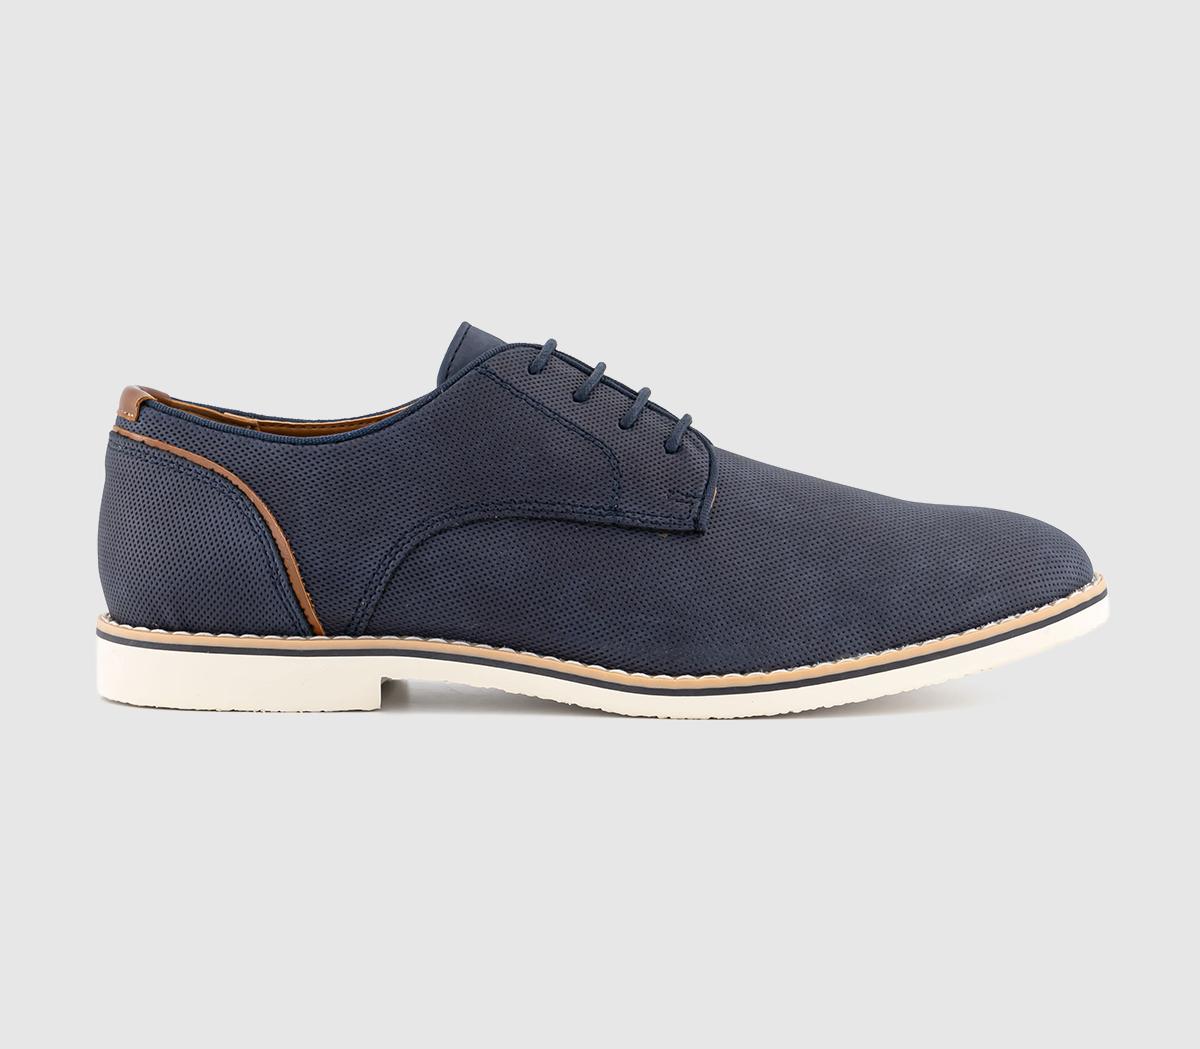 OFFICEChapter White Sole Embossed Derby ShoesNavy